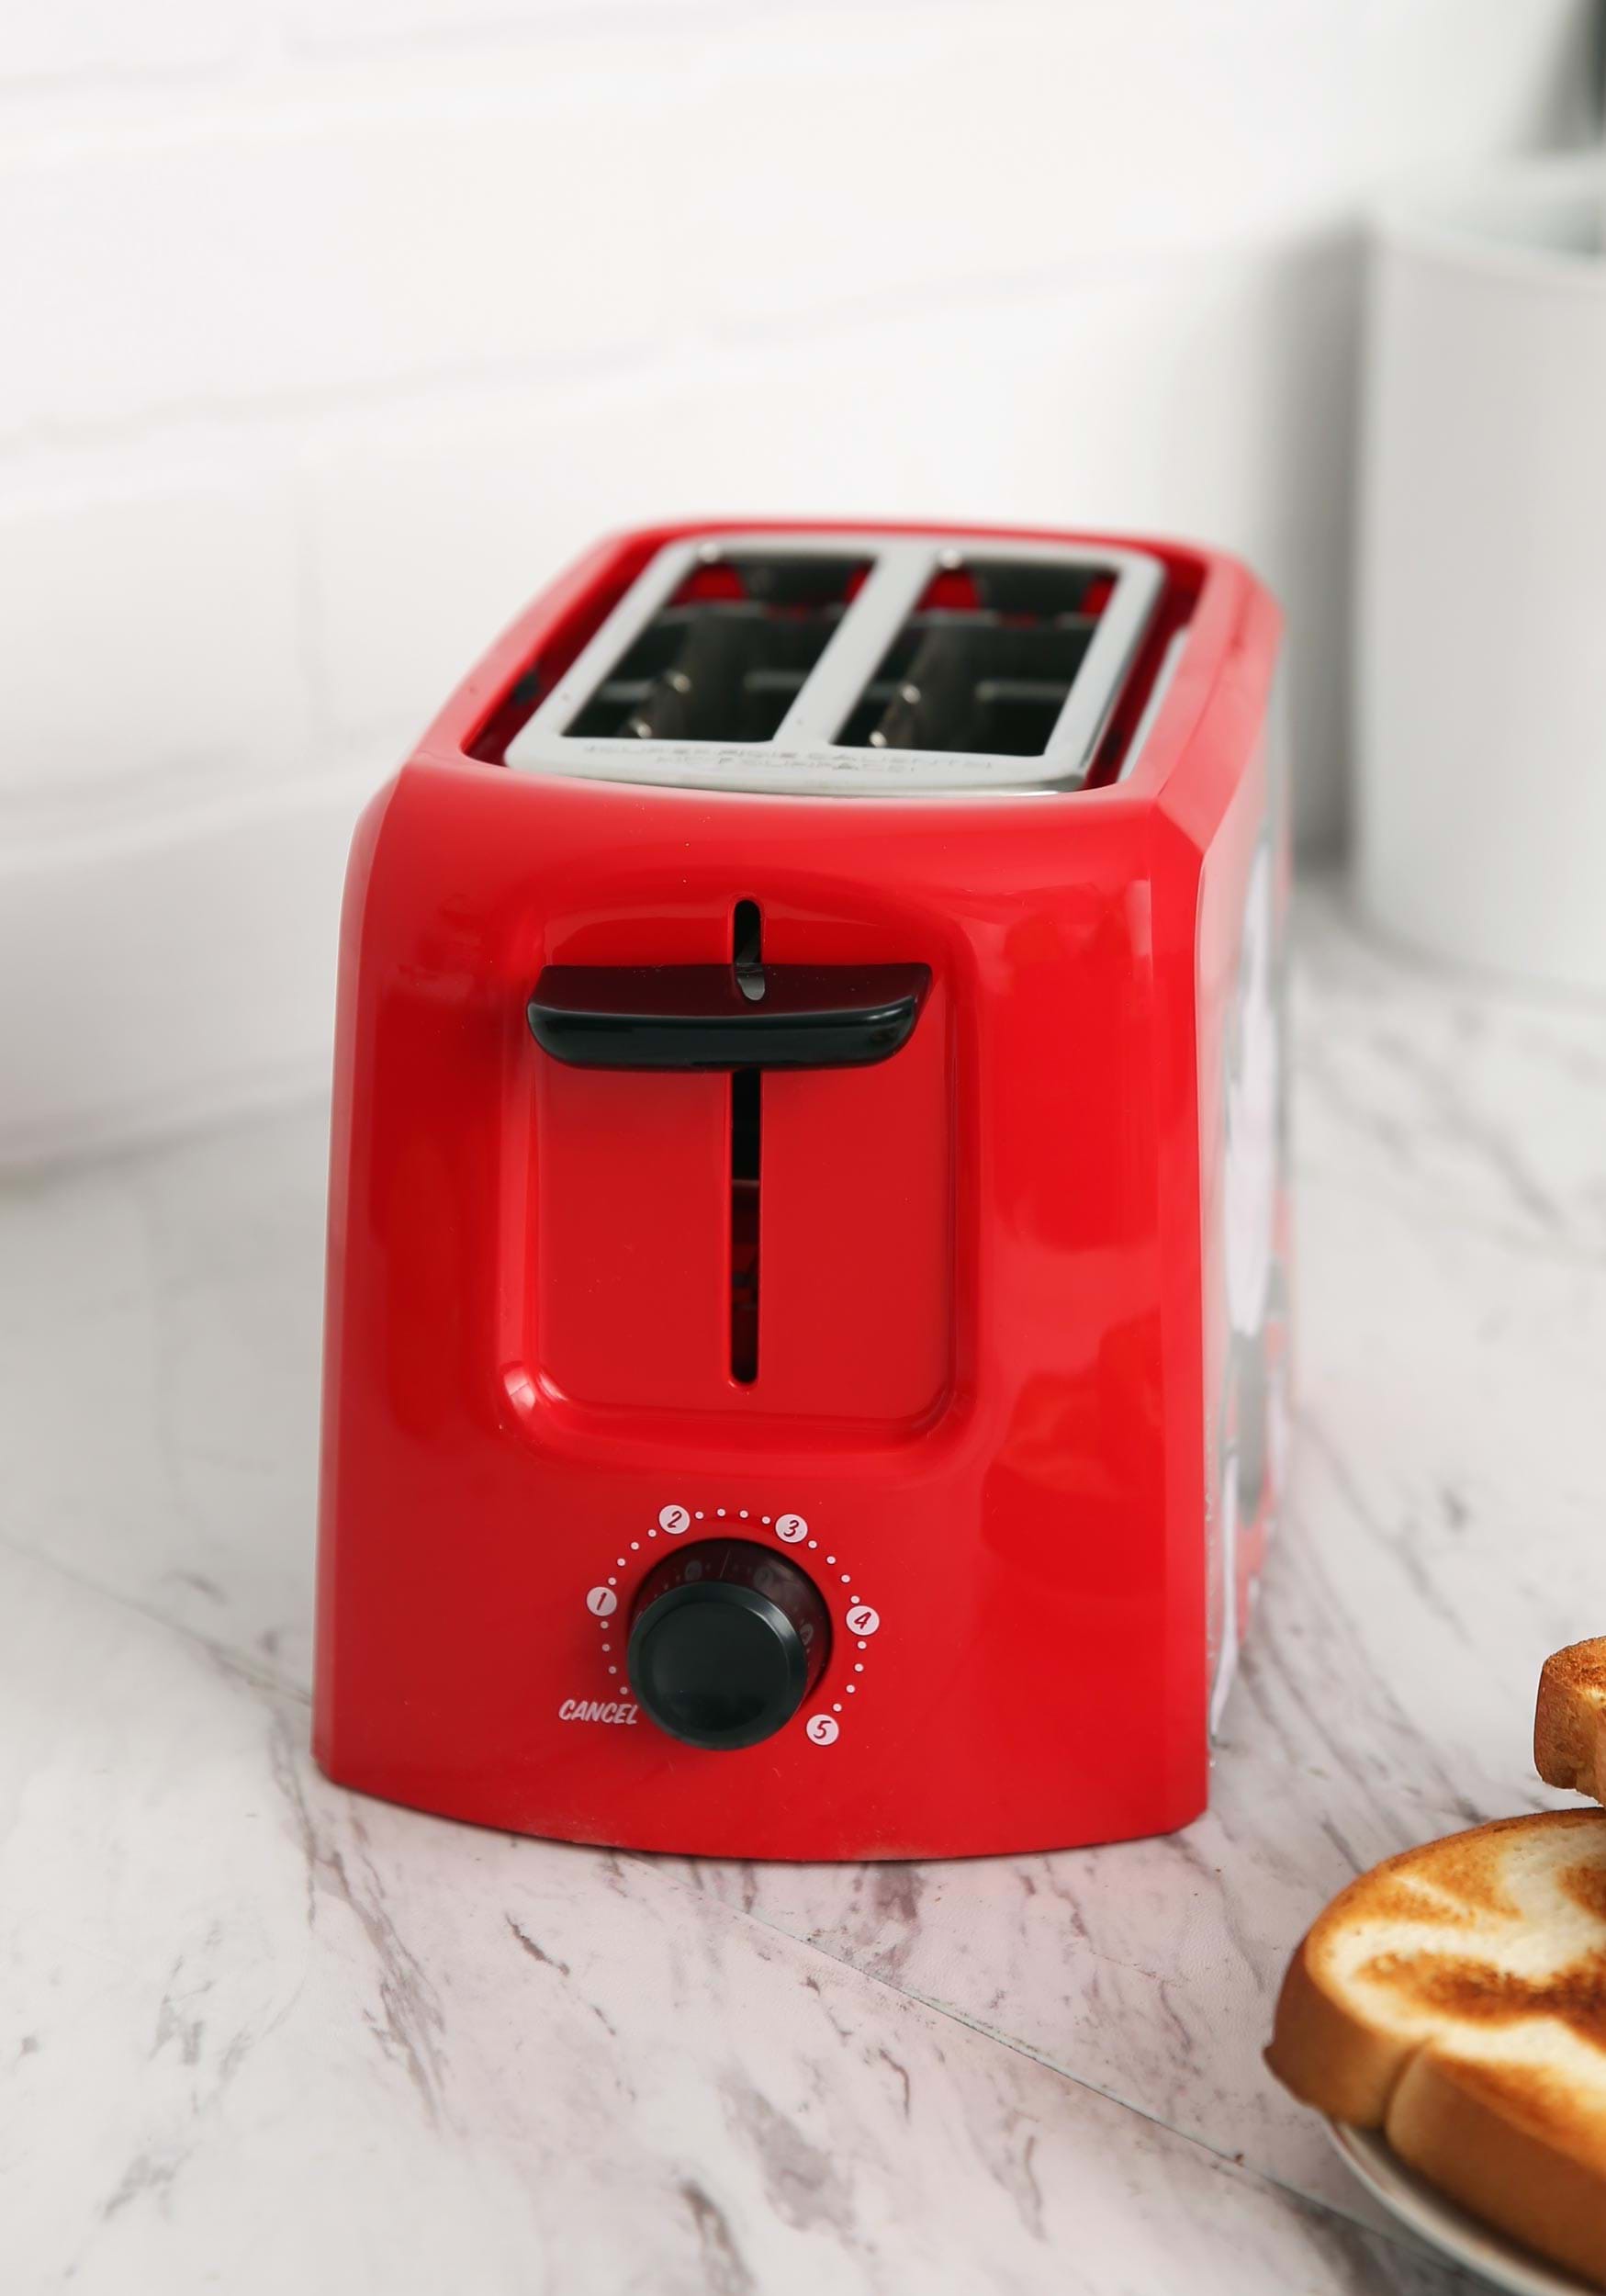 https://images.fun.com/products/44634/2-1-169825/mickey-mouse-toaster-alt-2.jpg